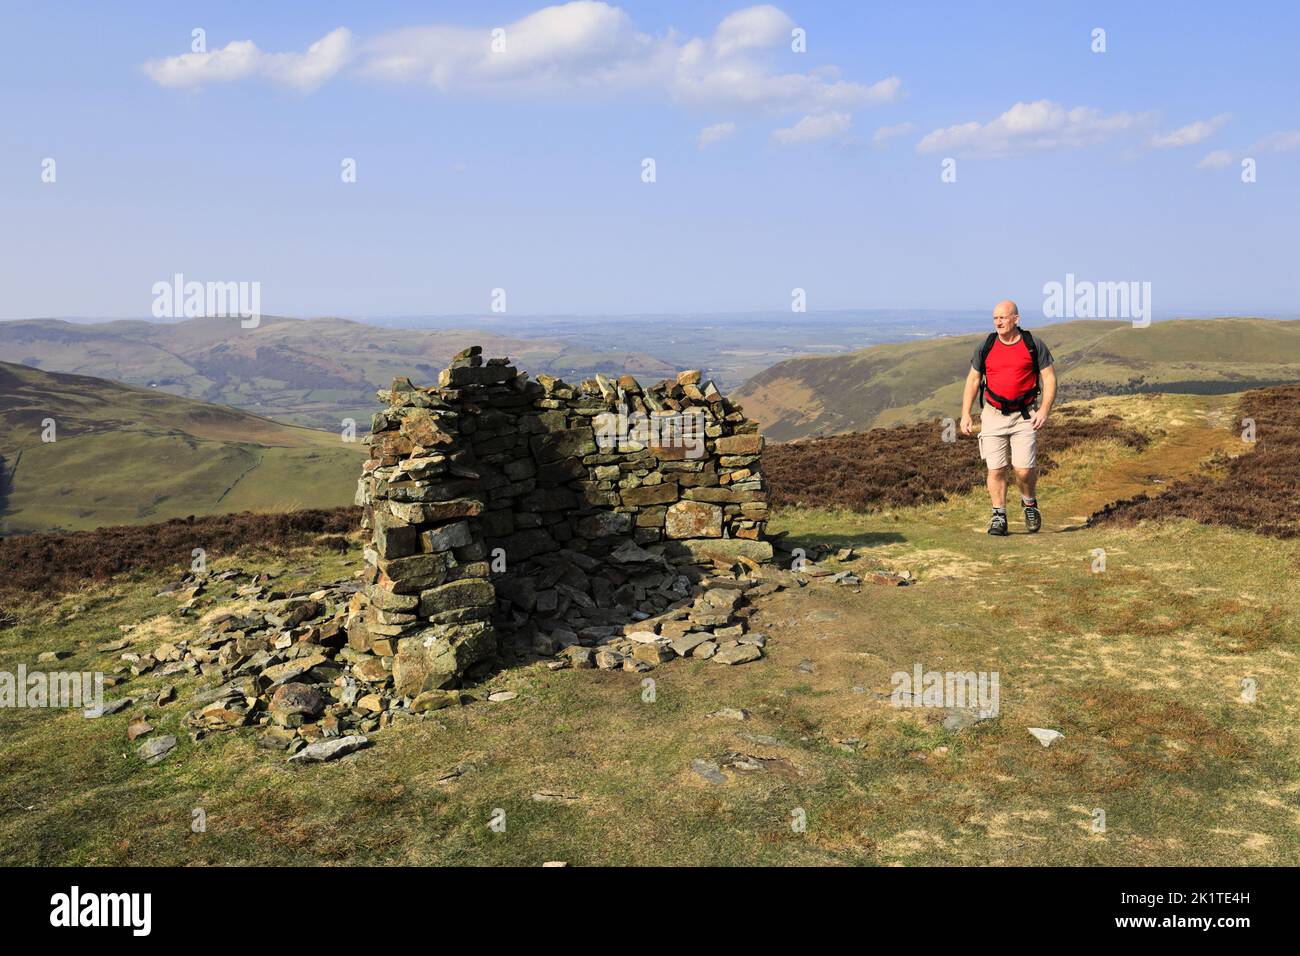 Walker at the summit of Whinlatter fell, Lake District National Park, Cumbria, England, UK Whinlatter fell is one of the 214 Wainwright fells. Stock Photo